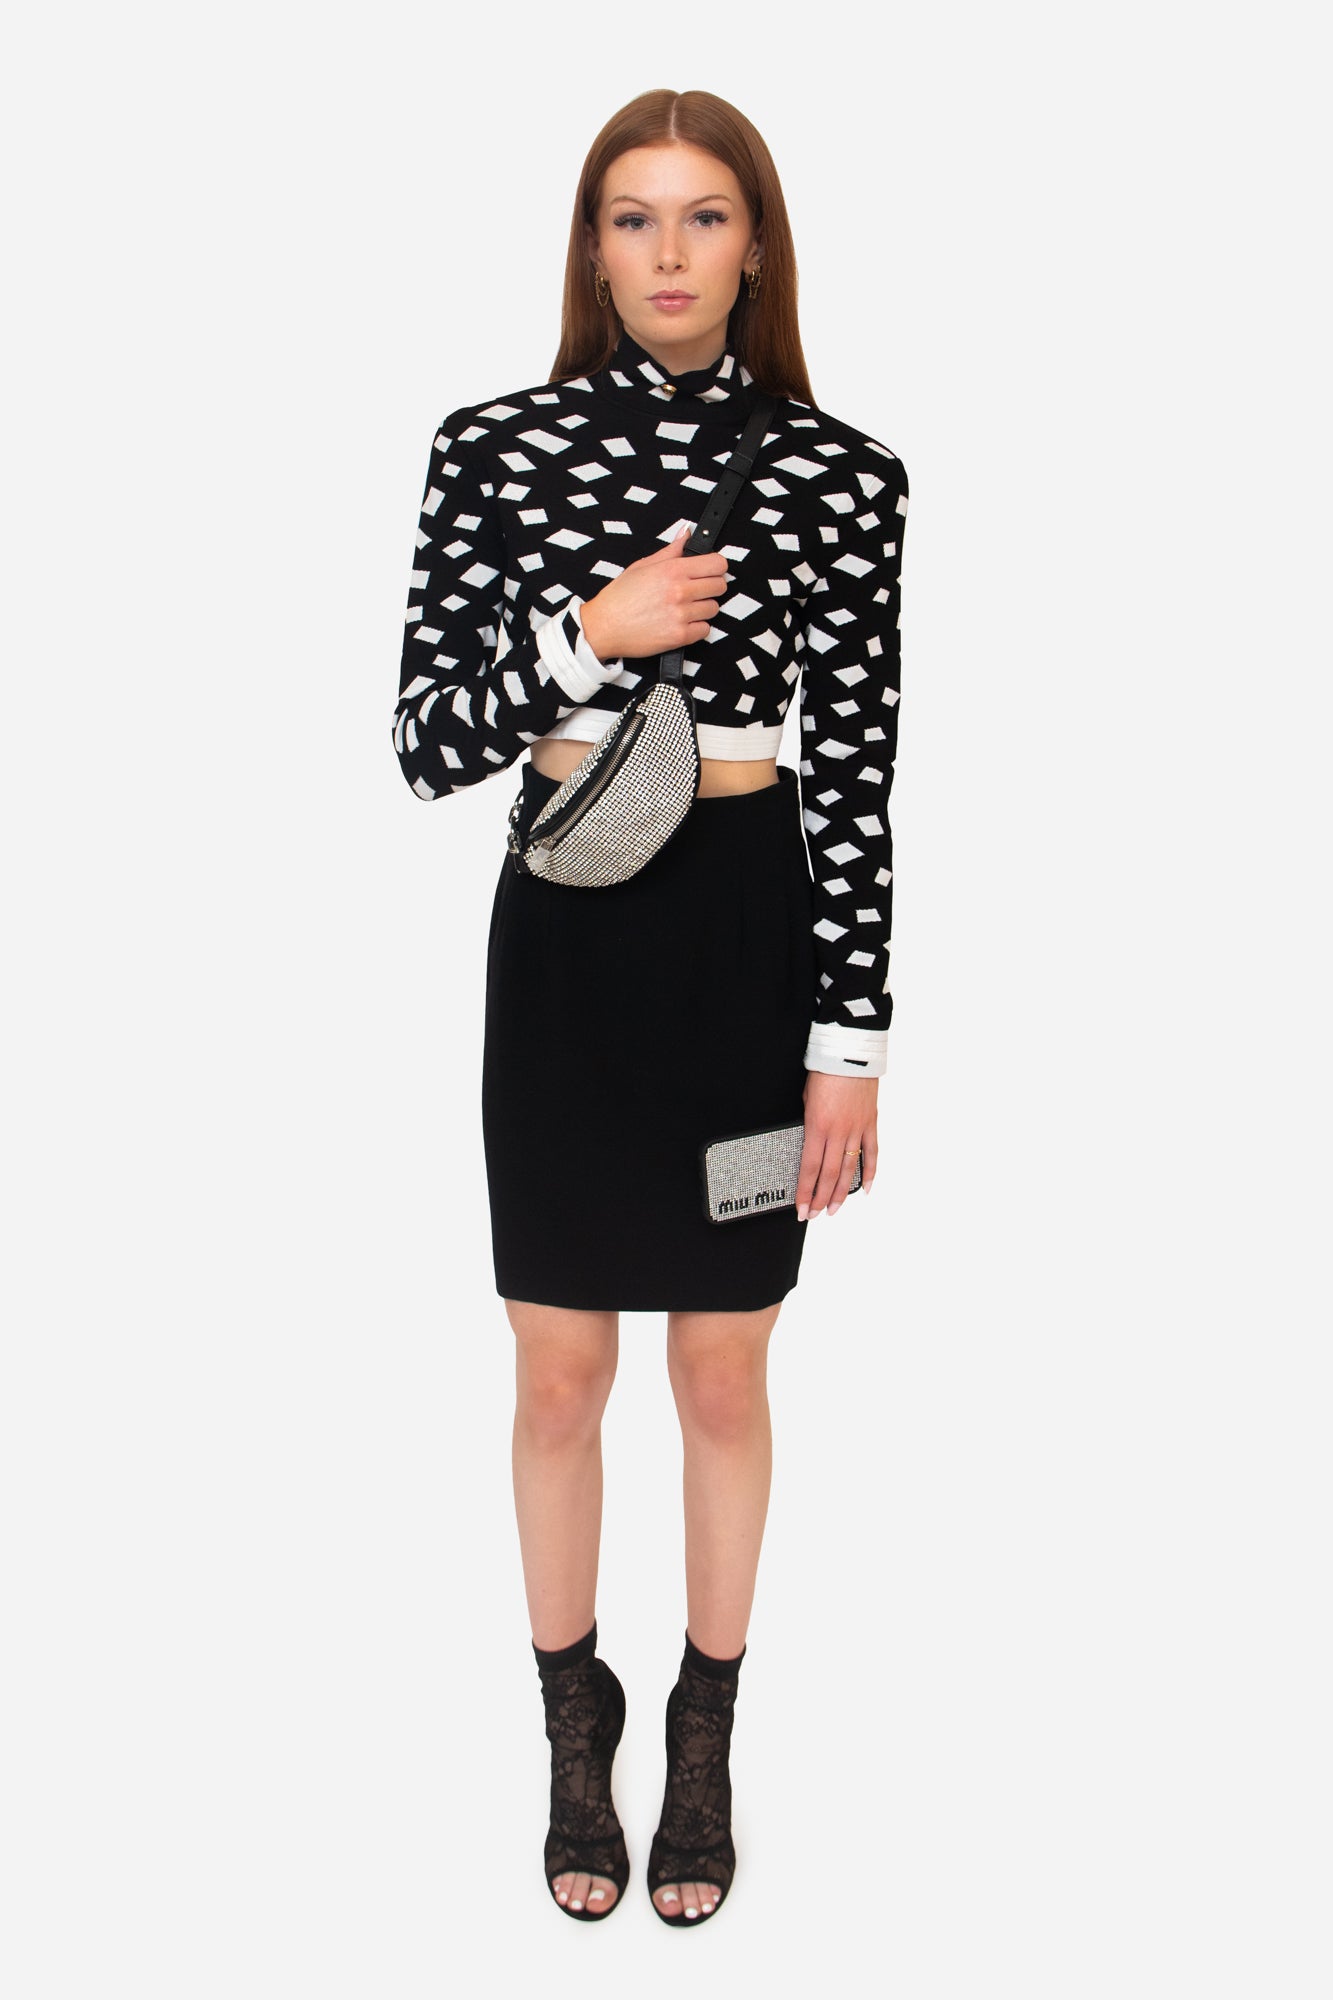 Cropped Long Sleeve Black And White Square Pattern Gold Pin